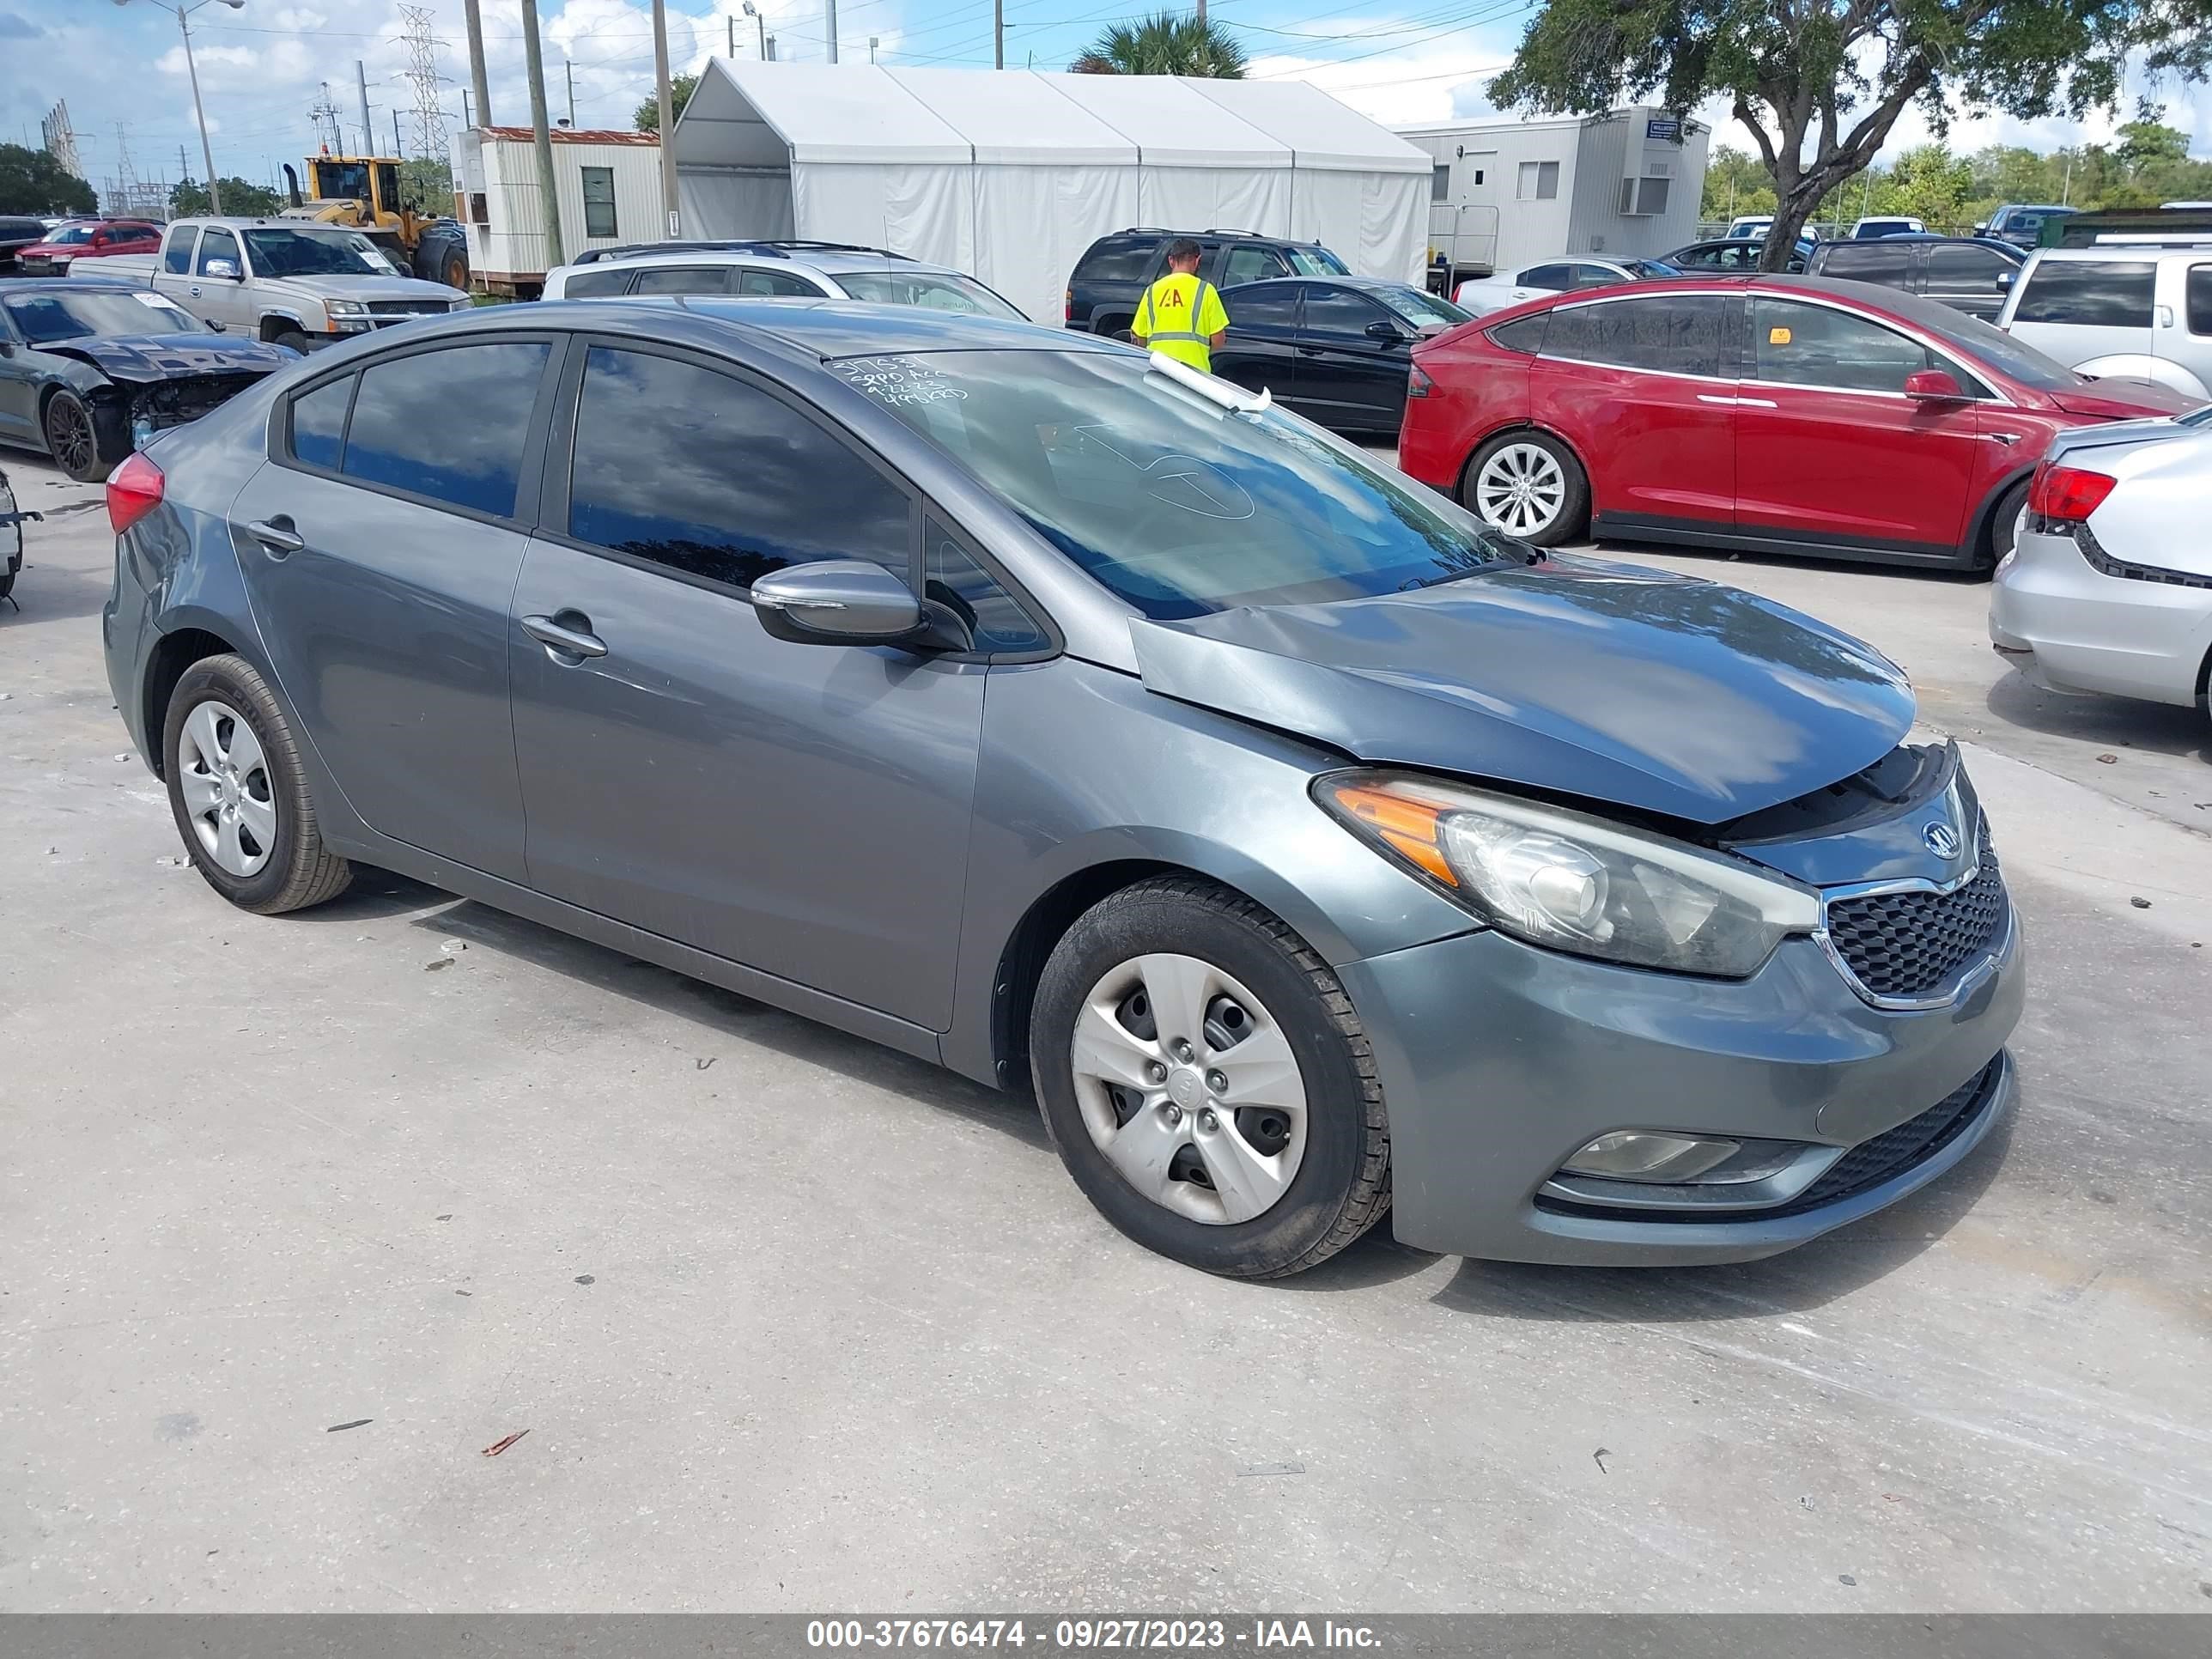 vin: KNAFX4A68G5593827 KNAFX4A68G5593827 2016 kia forte 1800 for Sale in 33760, 5152 126Th Ave N, Clearwater, USA